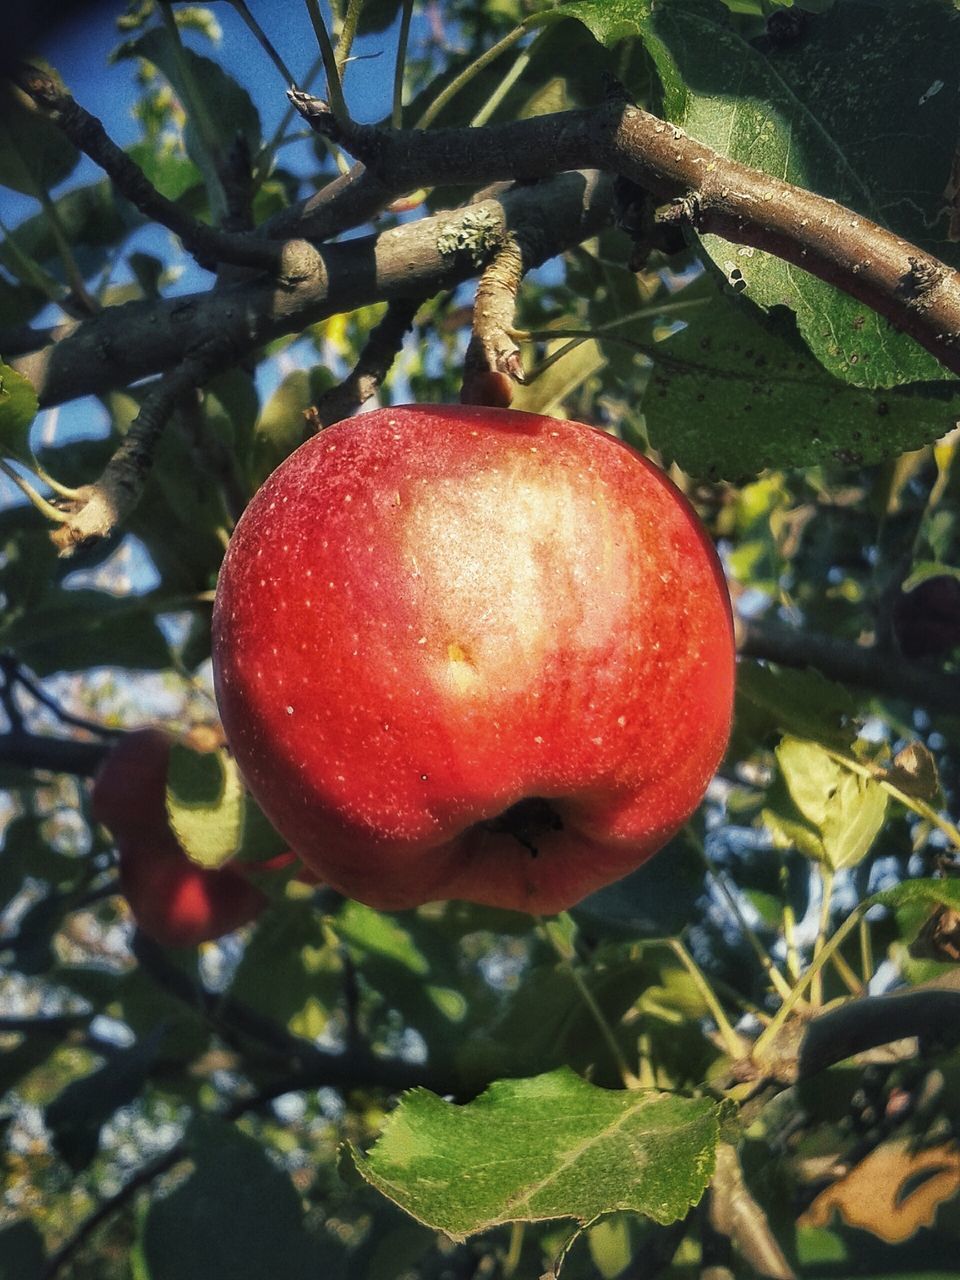 CLOSE-UP OF APPLE ON BRANCH